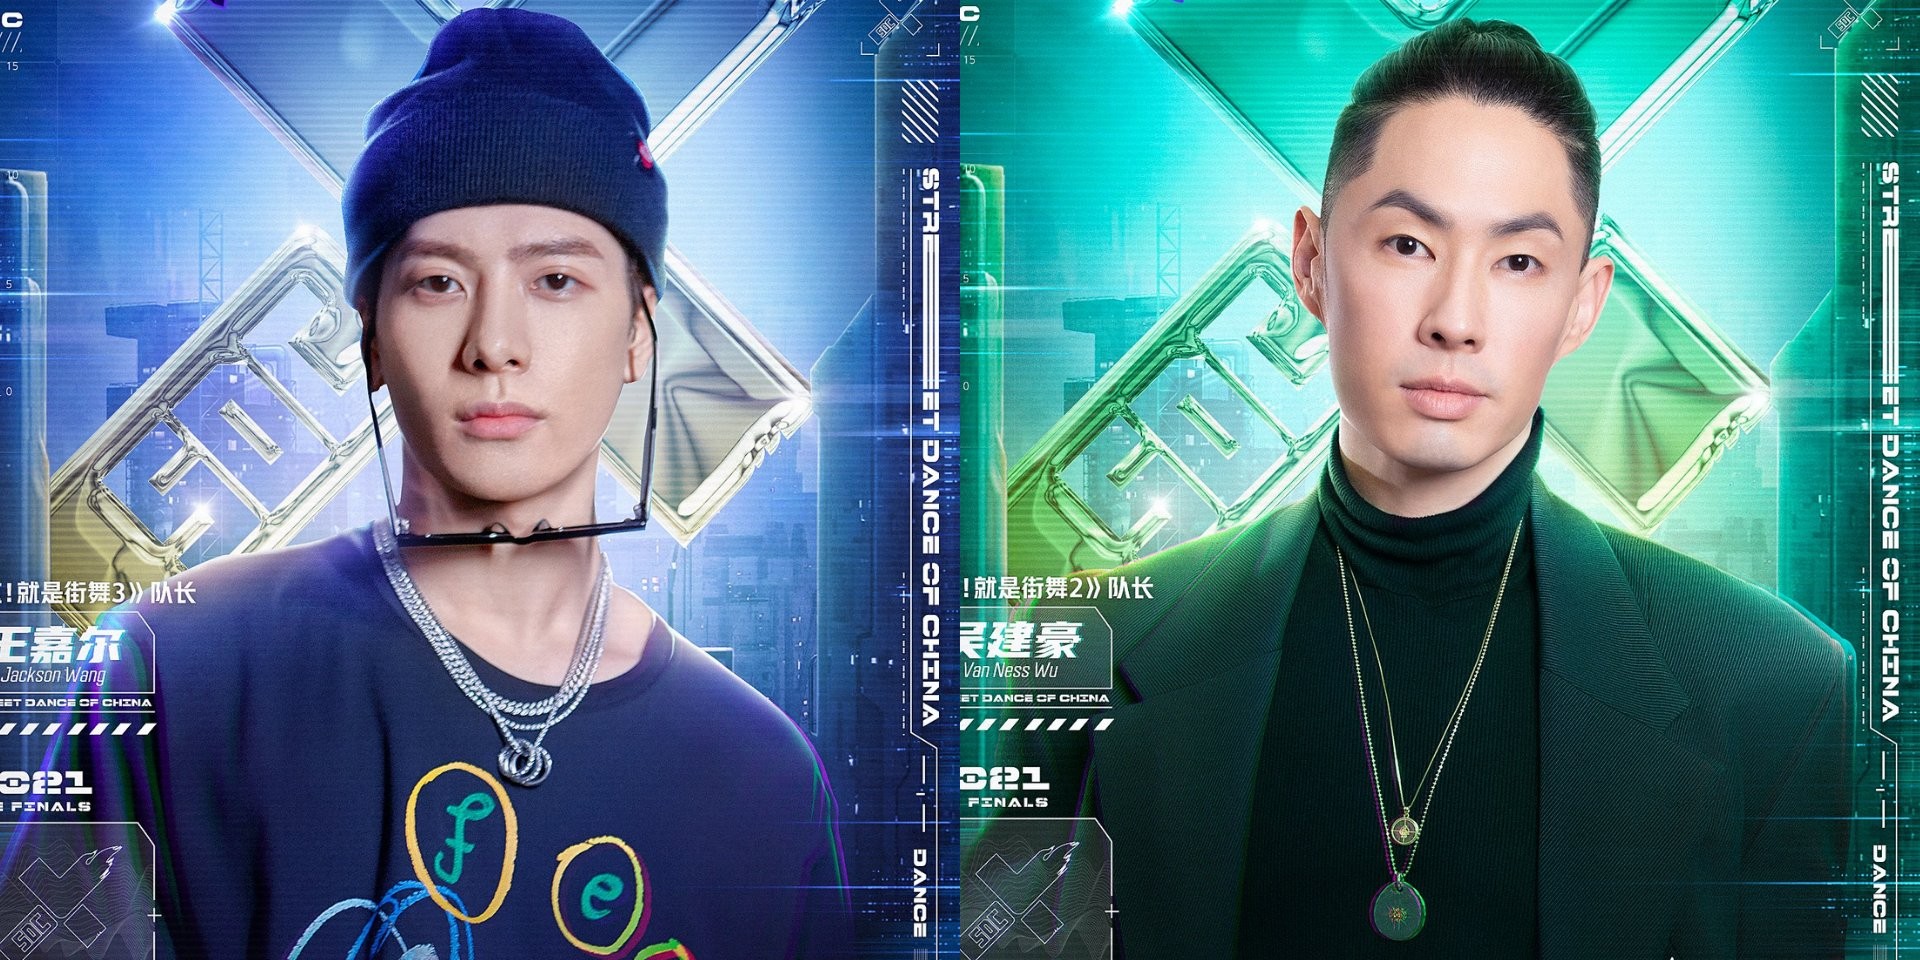 Jackson Wang, Vanness Wu, and more to appear at Street Dance of China grand finale